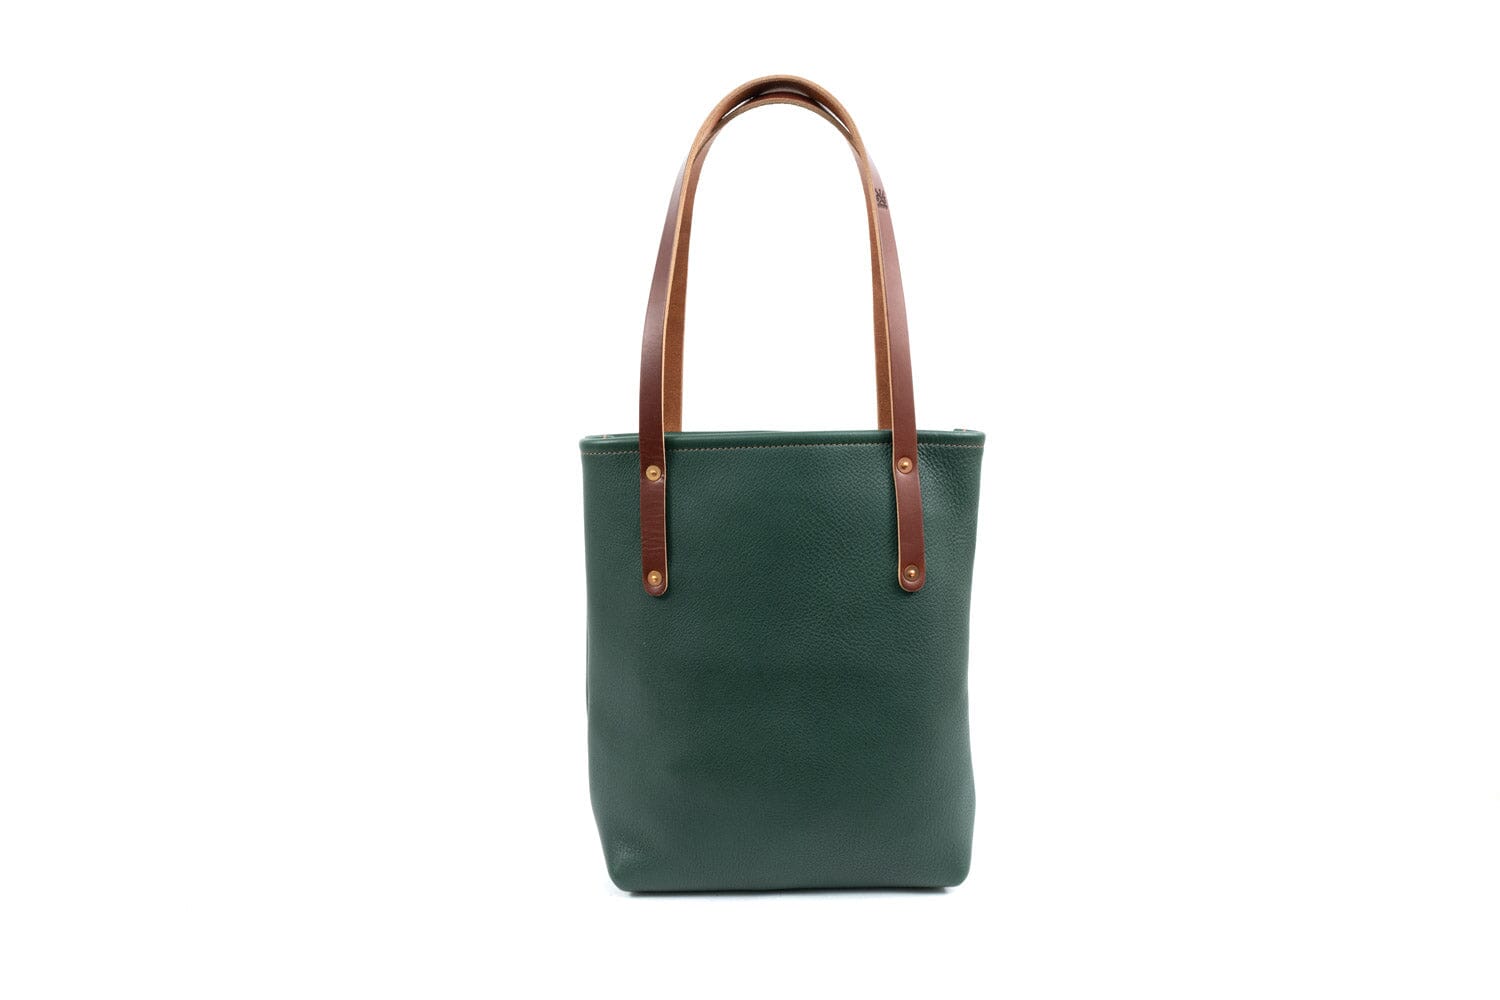 AVERY LEATHER TOTE BAG - SLIM MEDIUM FOREST GREEN (RTS)